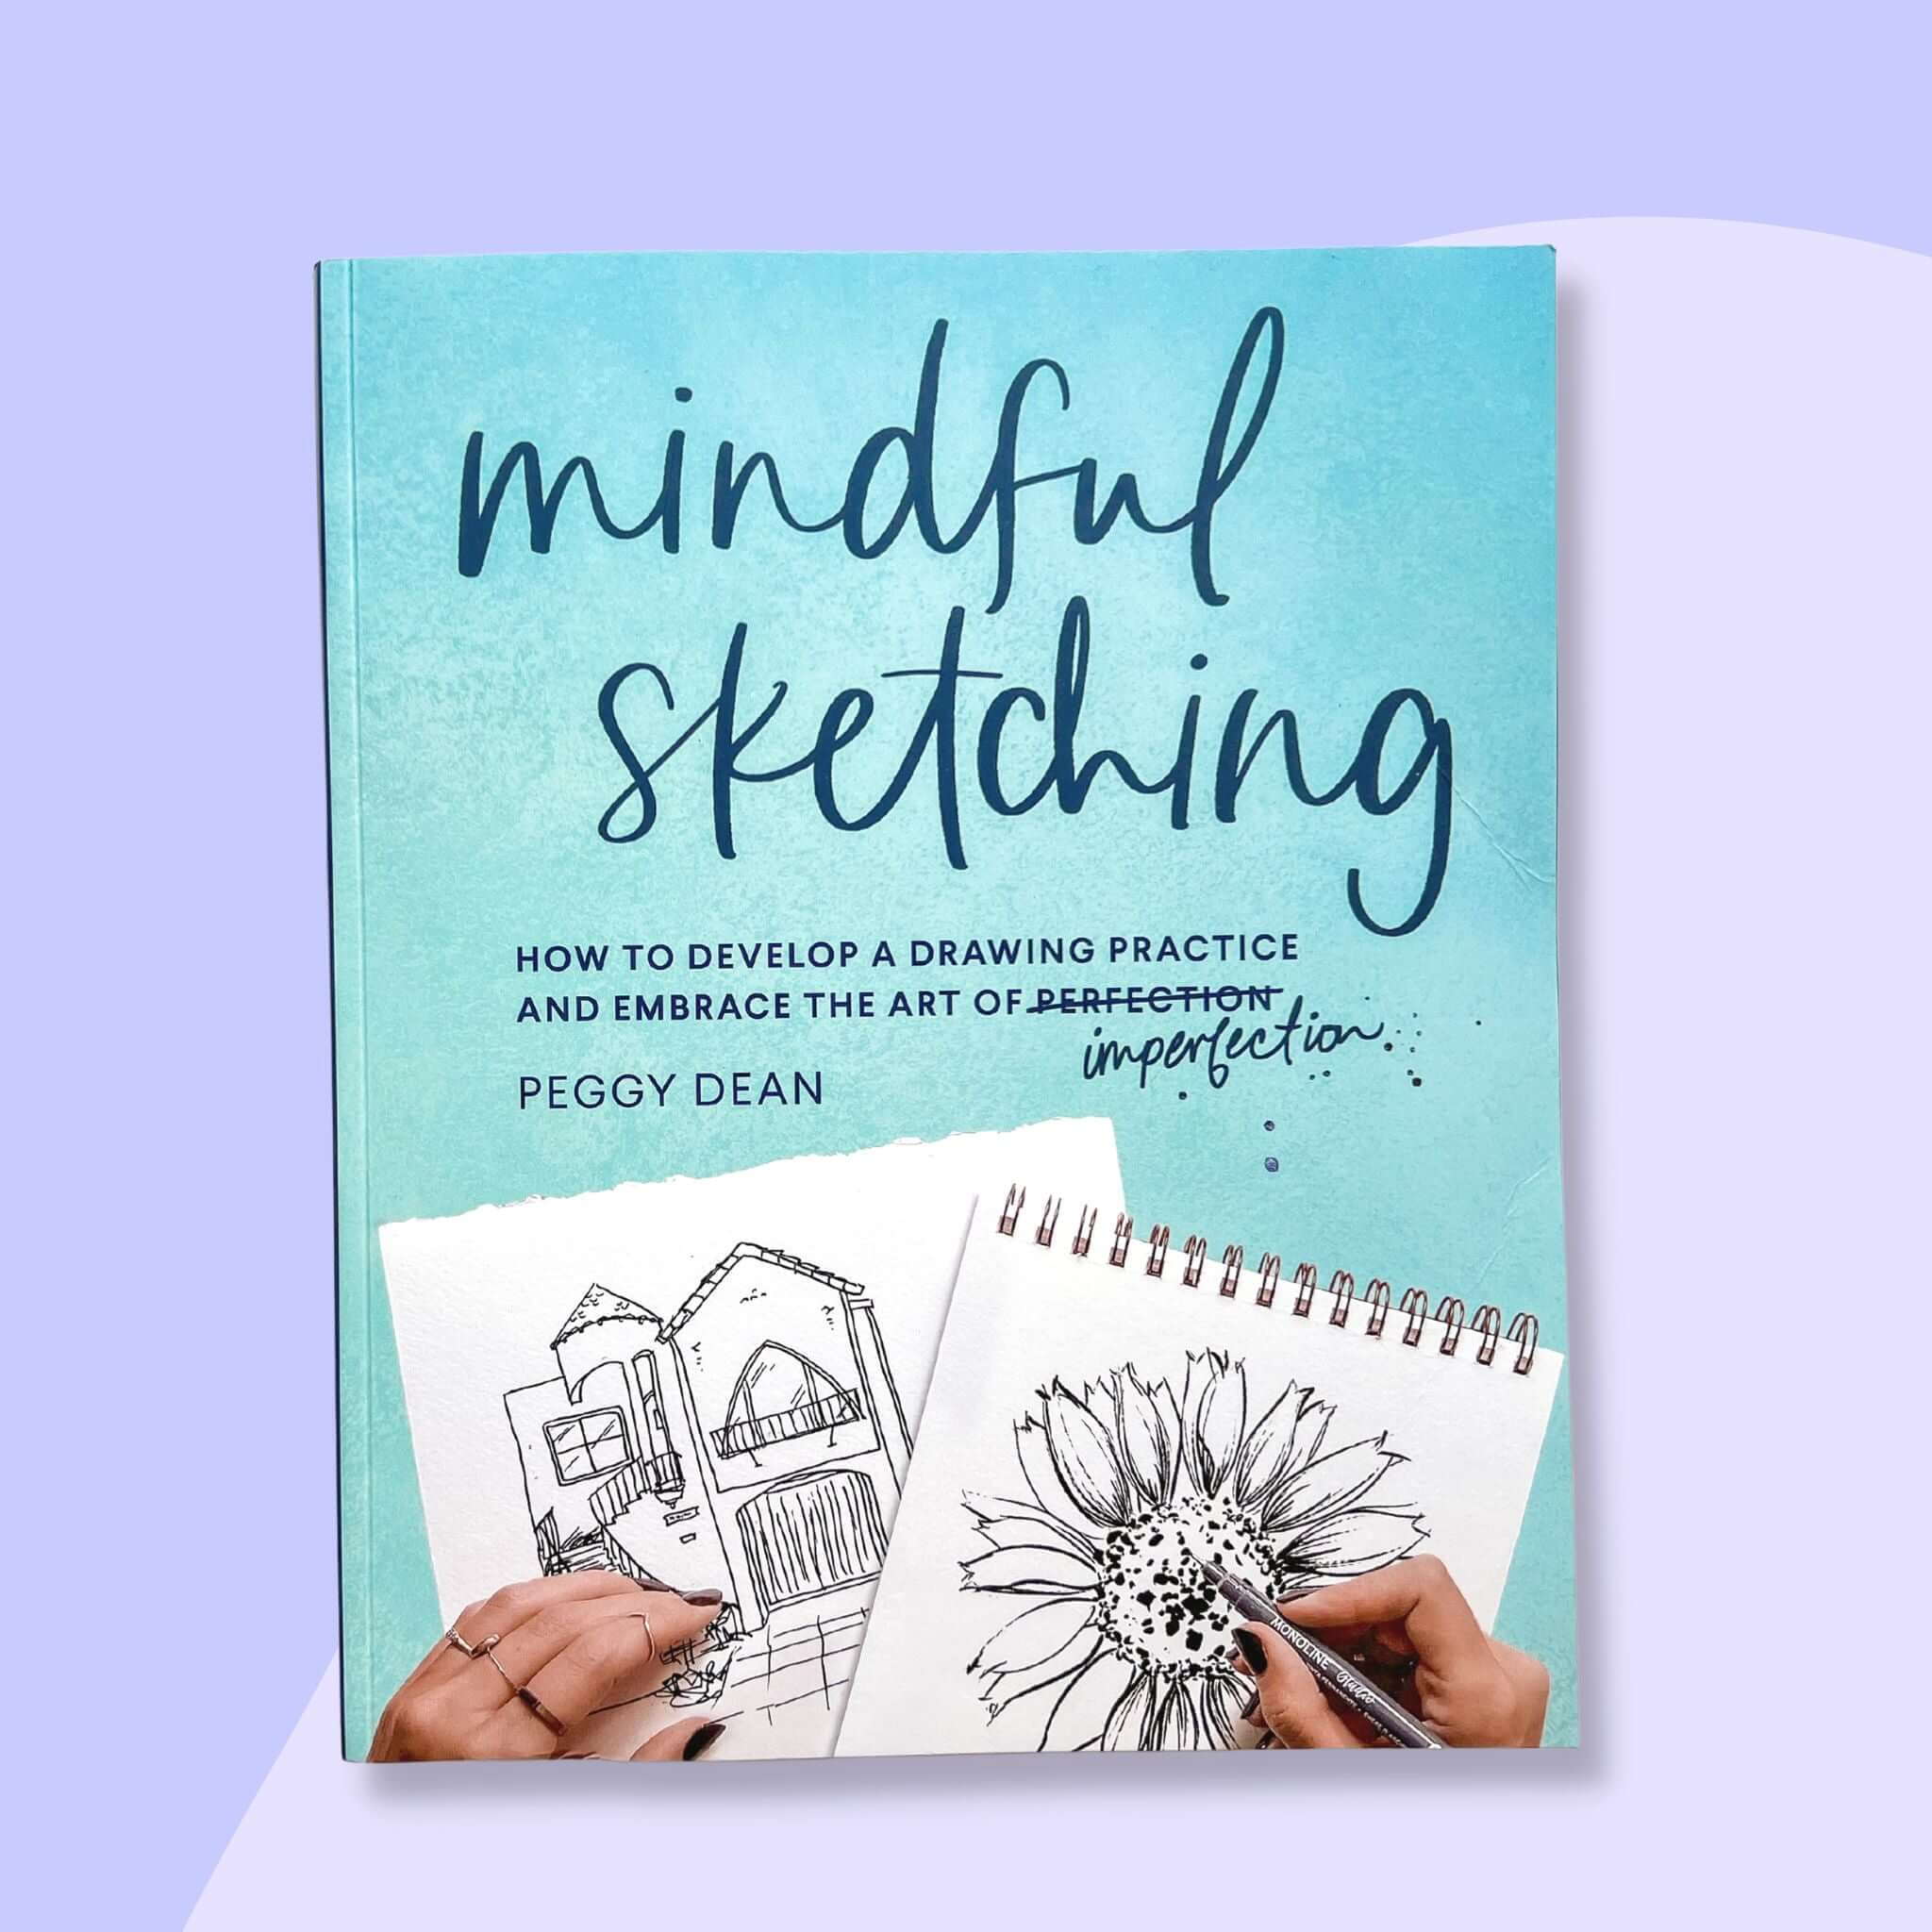 Mindful Sketching: How to Develop a Drawing Practice and Embrace the Art of Imperfection [Book]